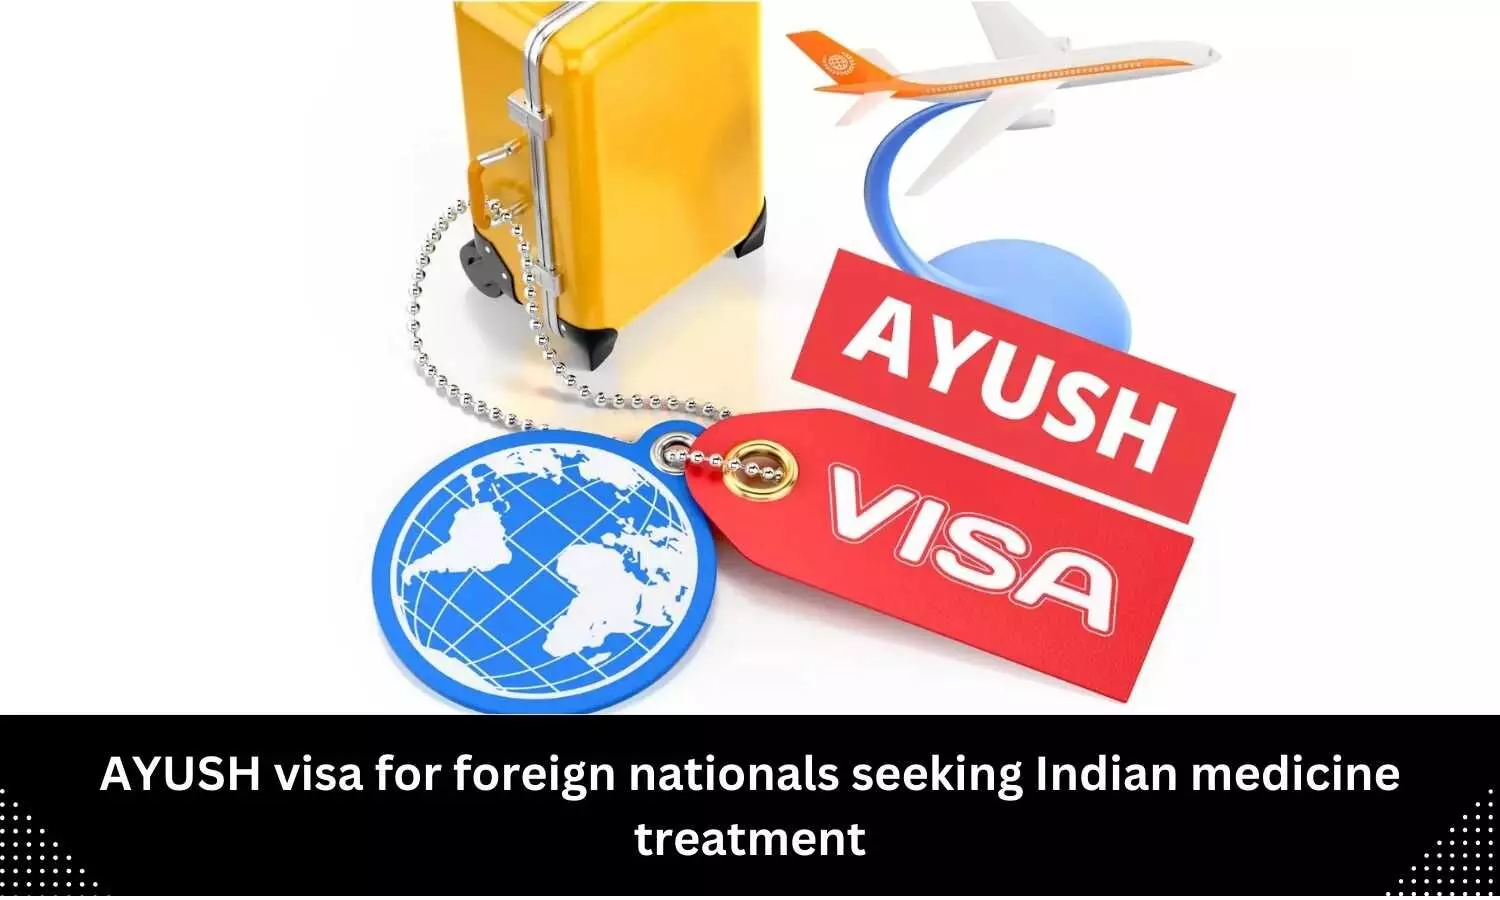 Govt introduces new category of Ayush visa for foreigners seeking medical treatment in India